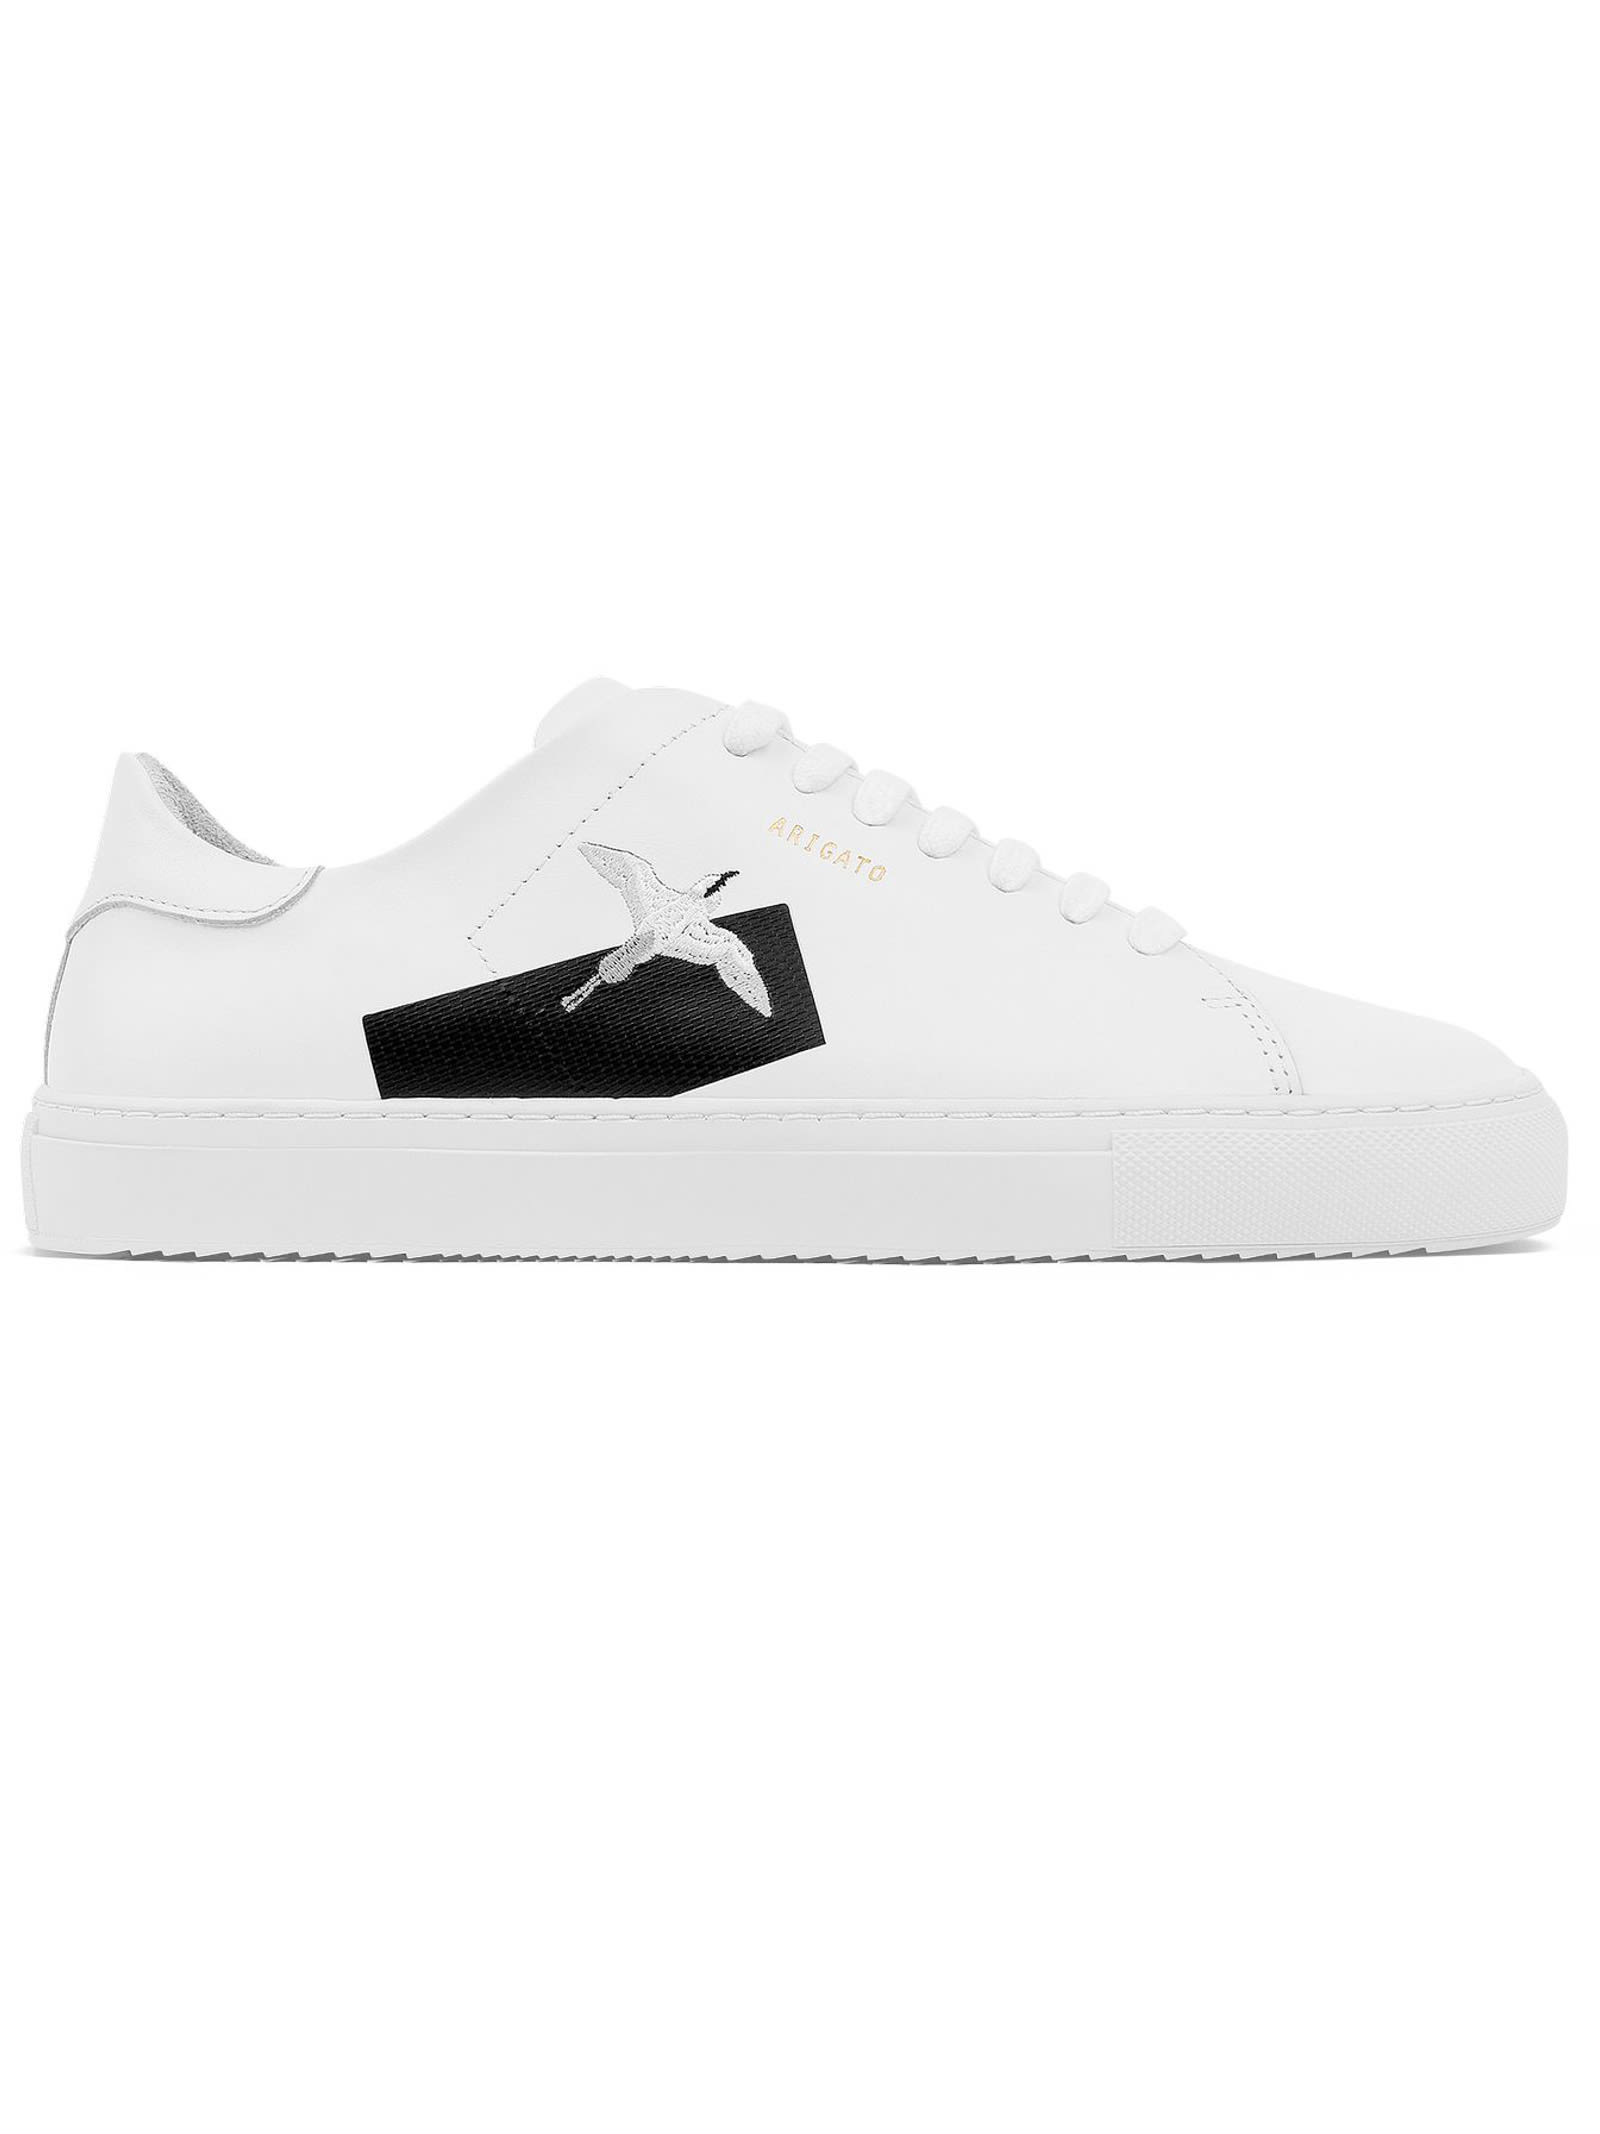 AXEL ARIGATO WHITE LEATHER CLEAN 90 SNEAKERS